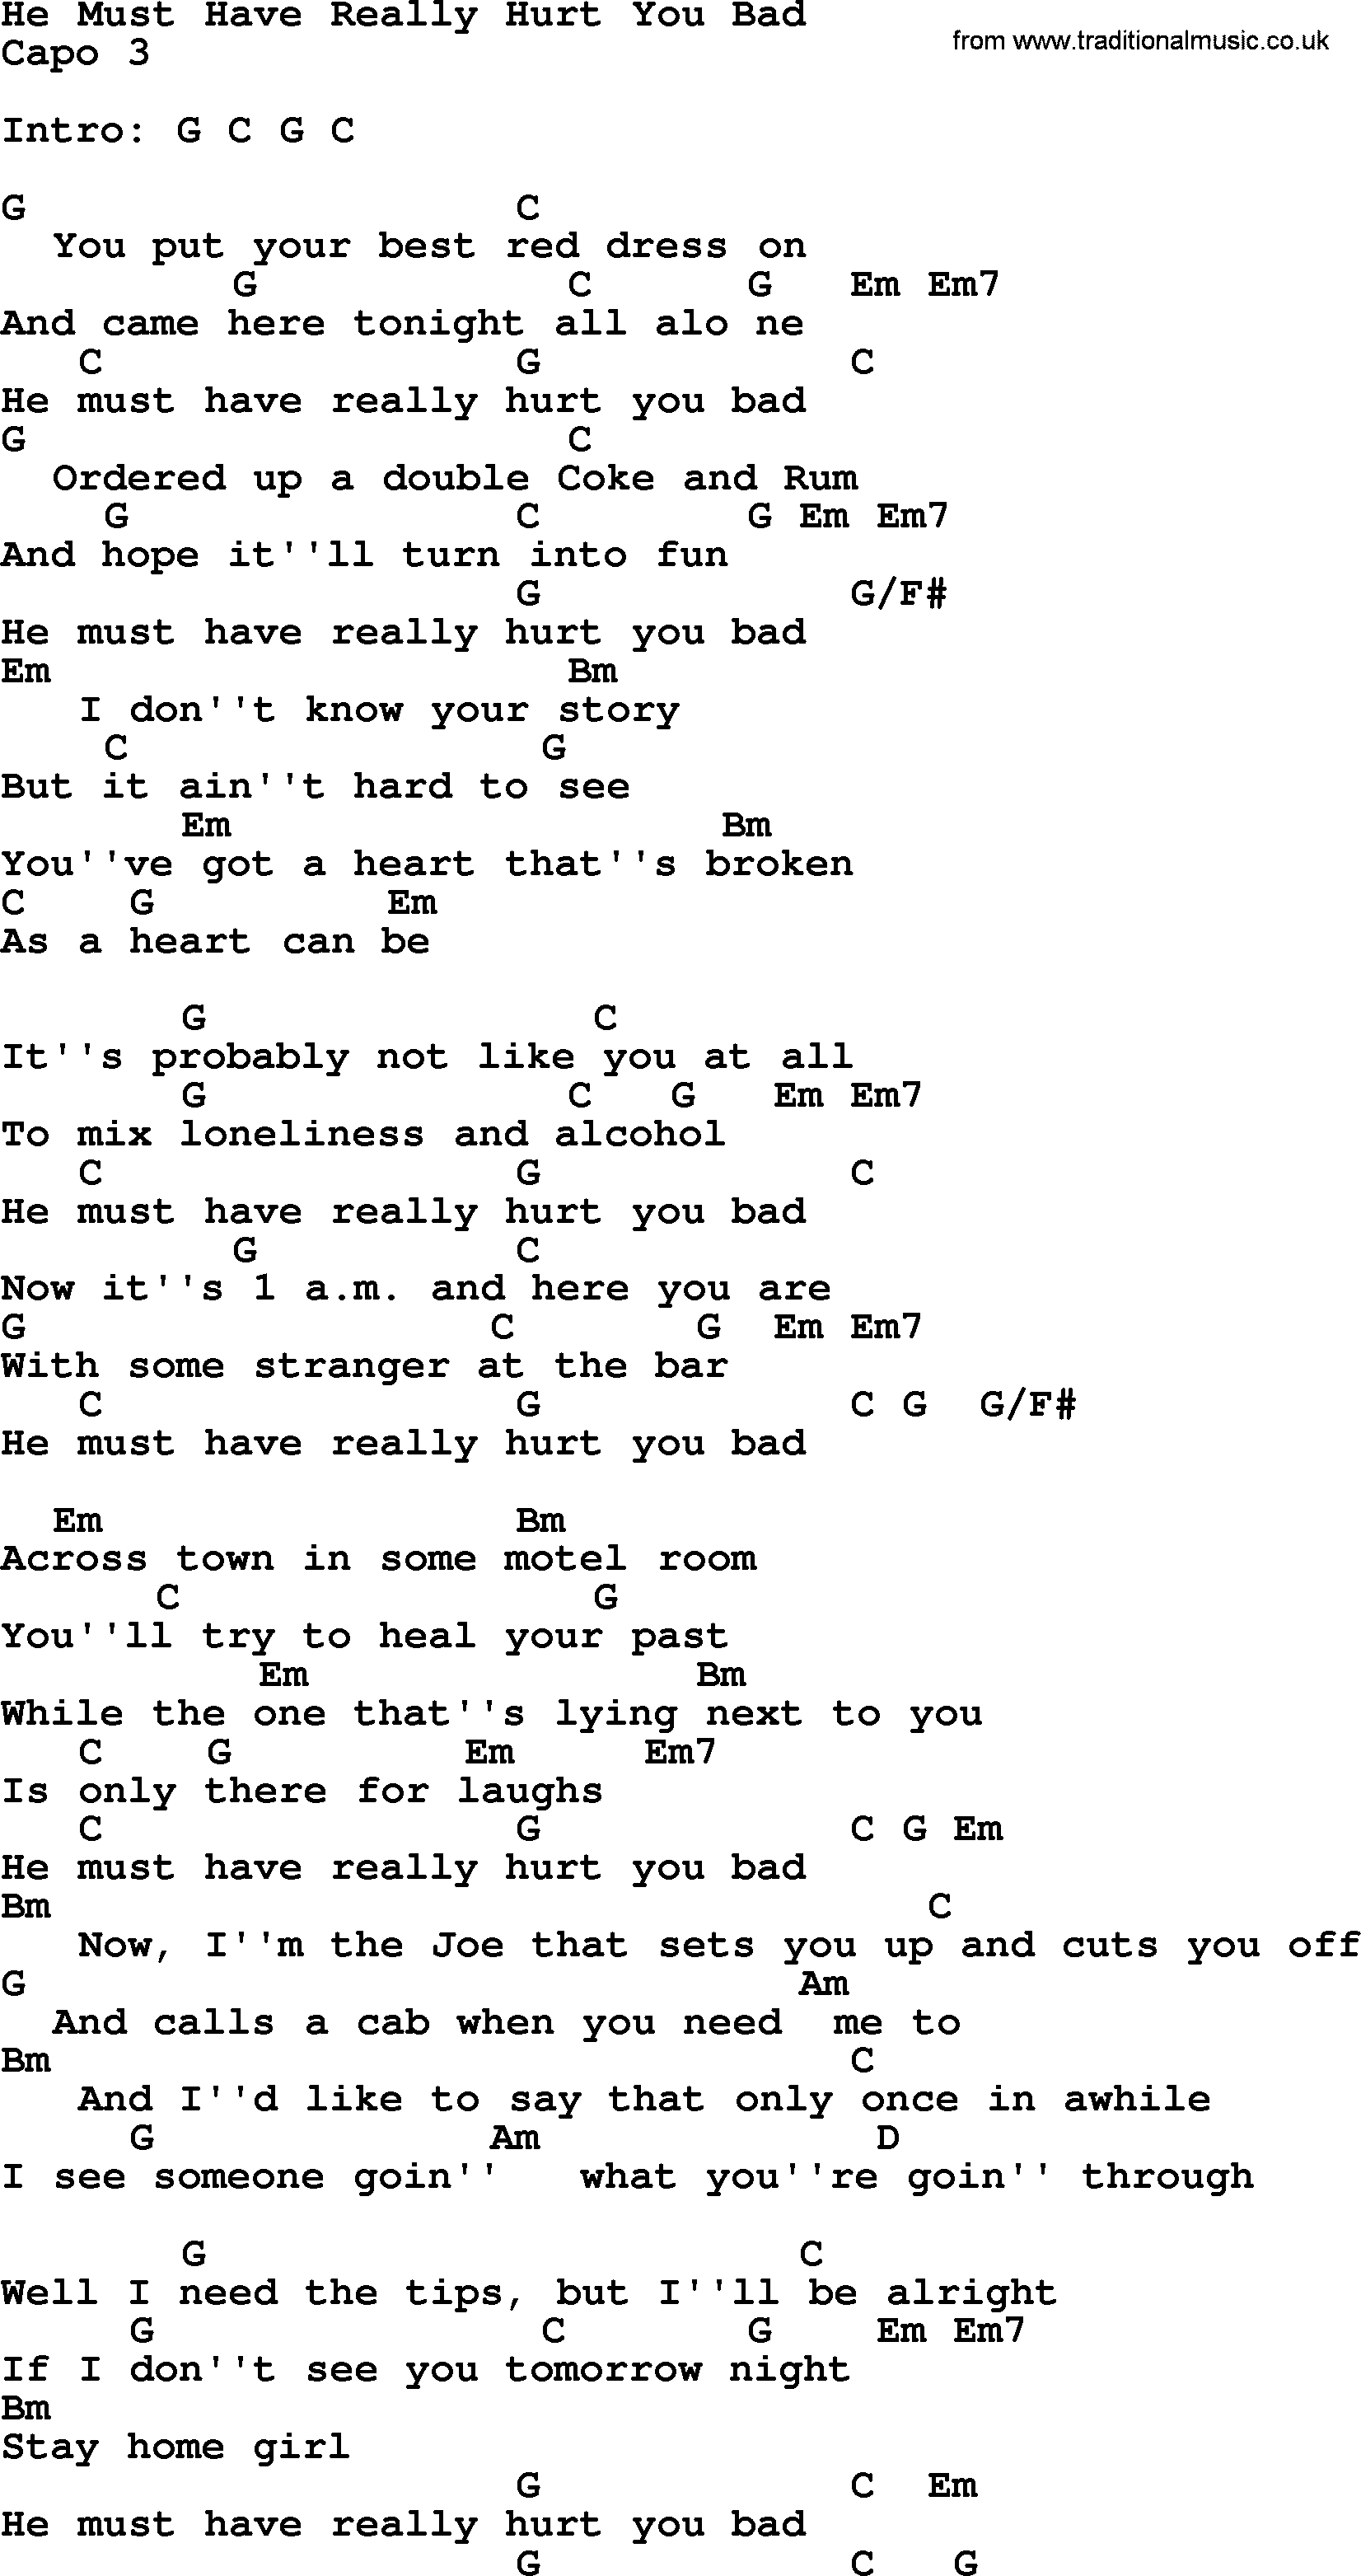 George Strait song: He Must Have Really Hurt You Bad, lyrics and chords